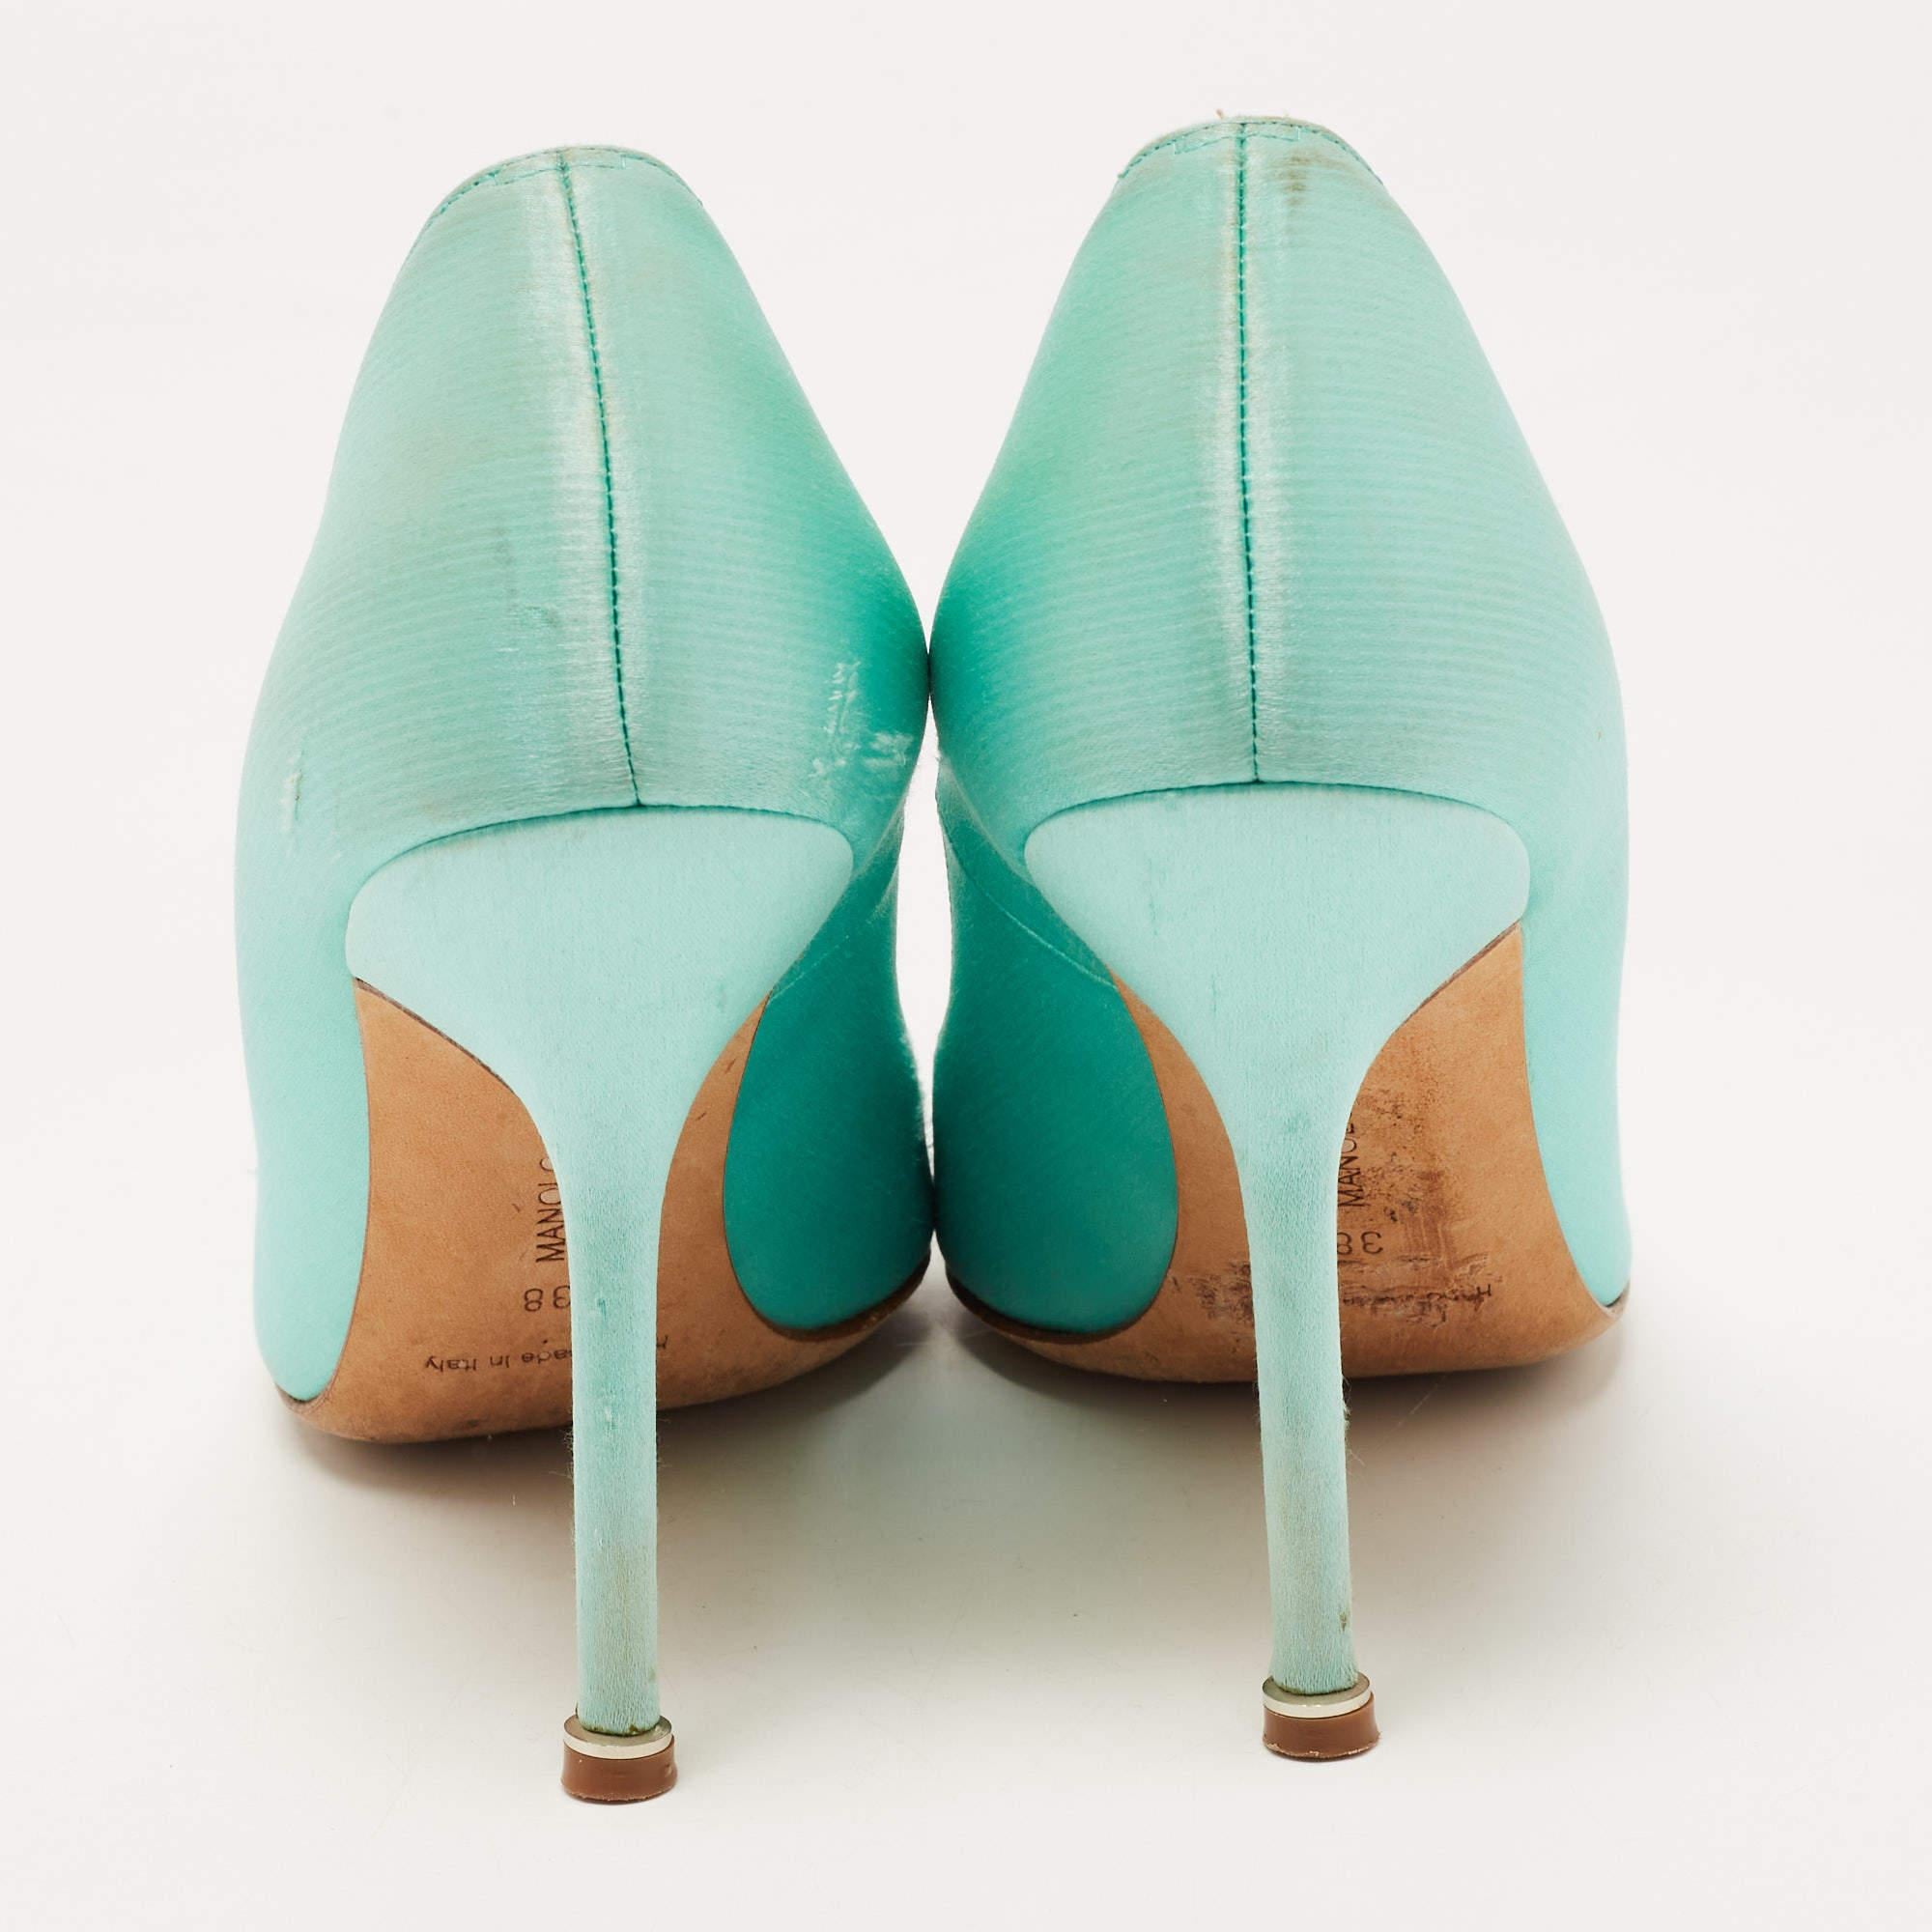 Manolo Turquoise - 8 For Sale on 1stDibs